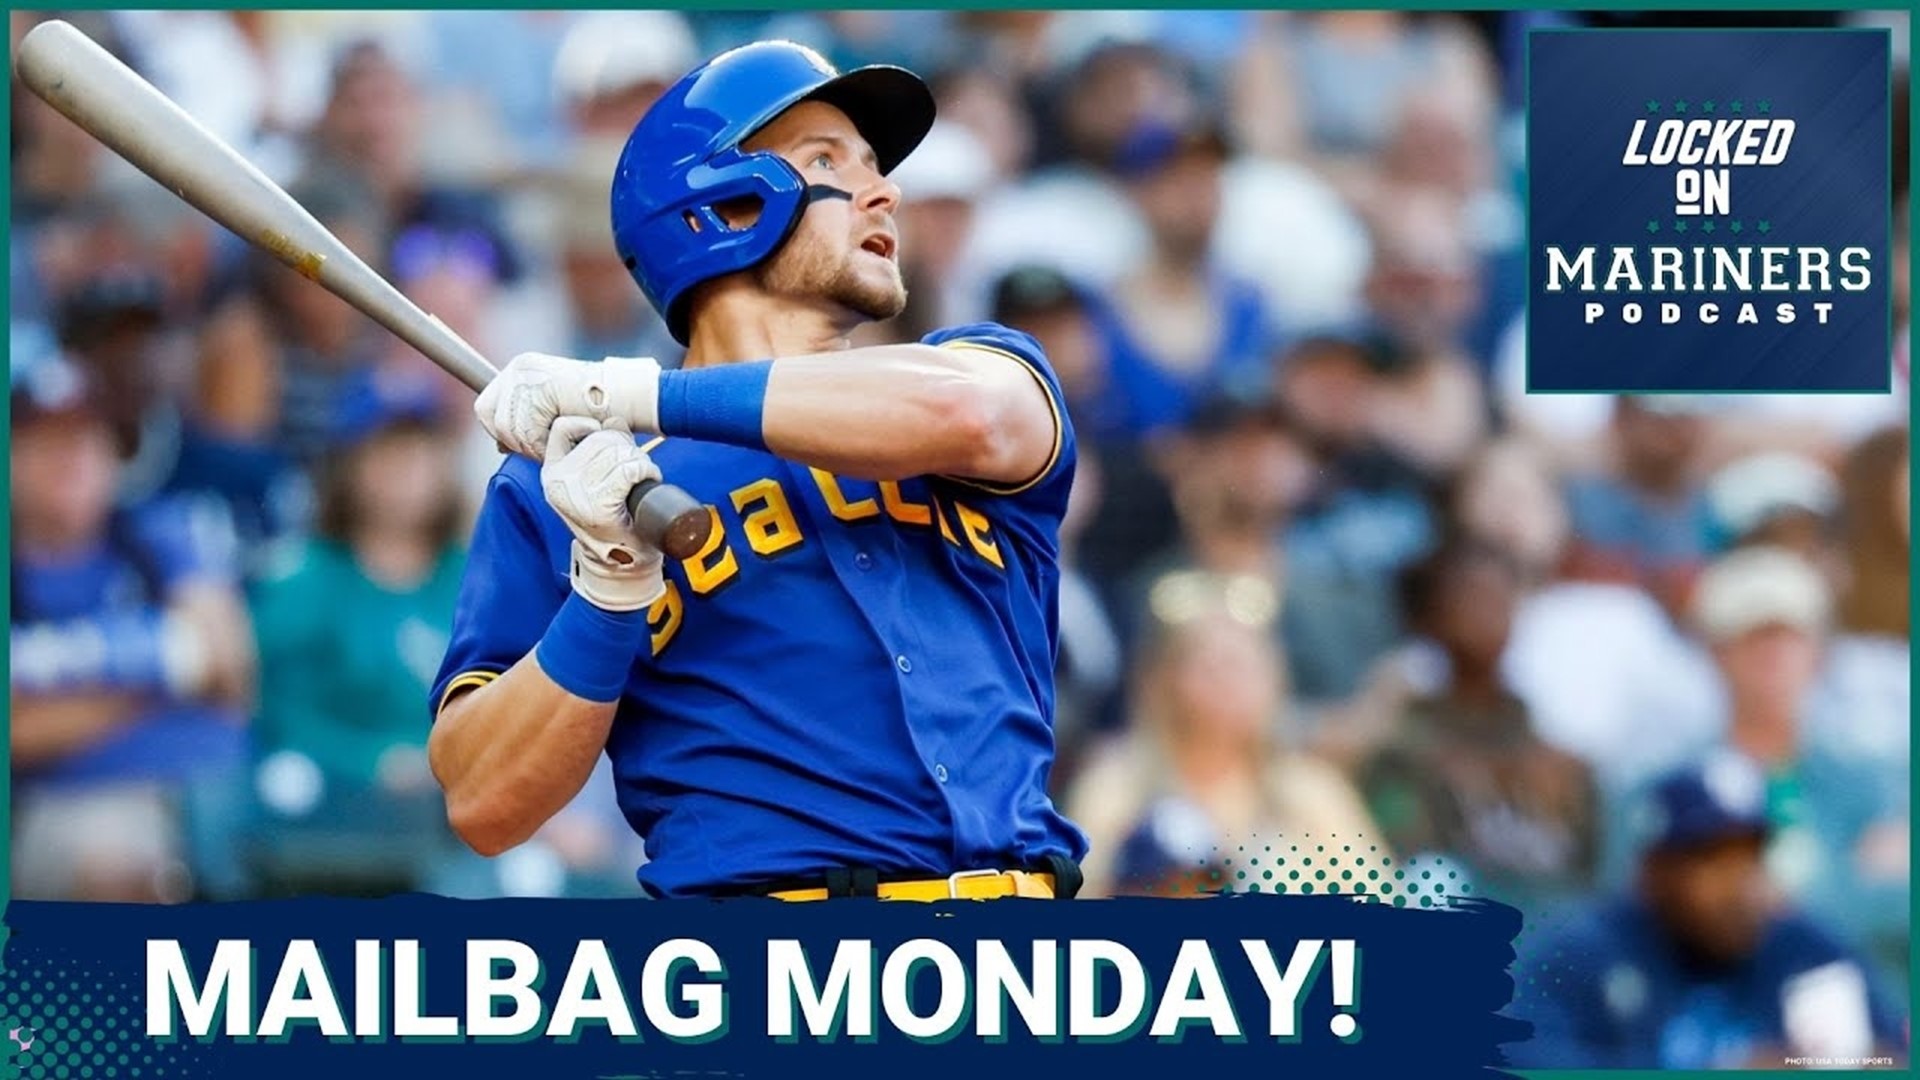 It's Mailbag Monday! The guys answer a plethora of Mariners questions from listeners, including: Is this upcoming series with the Angels a "must sweep?"